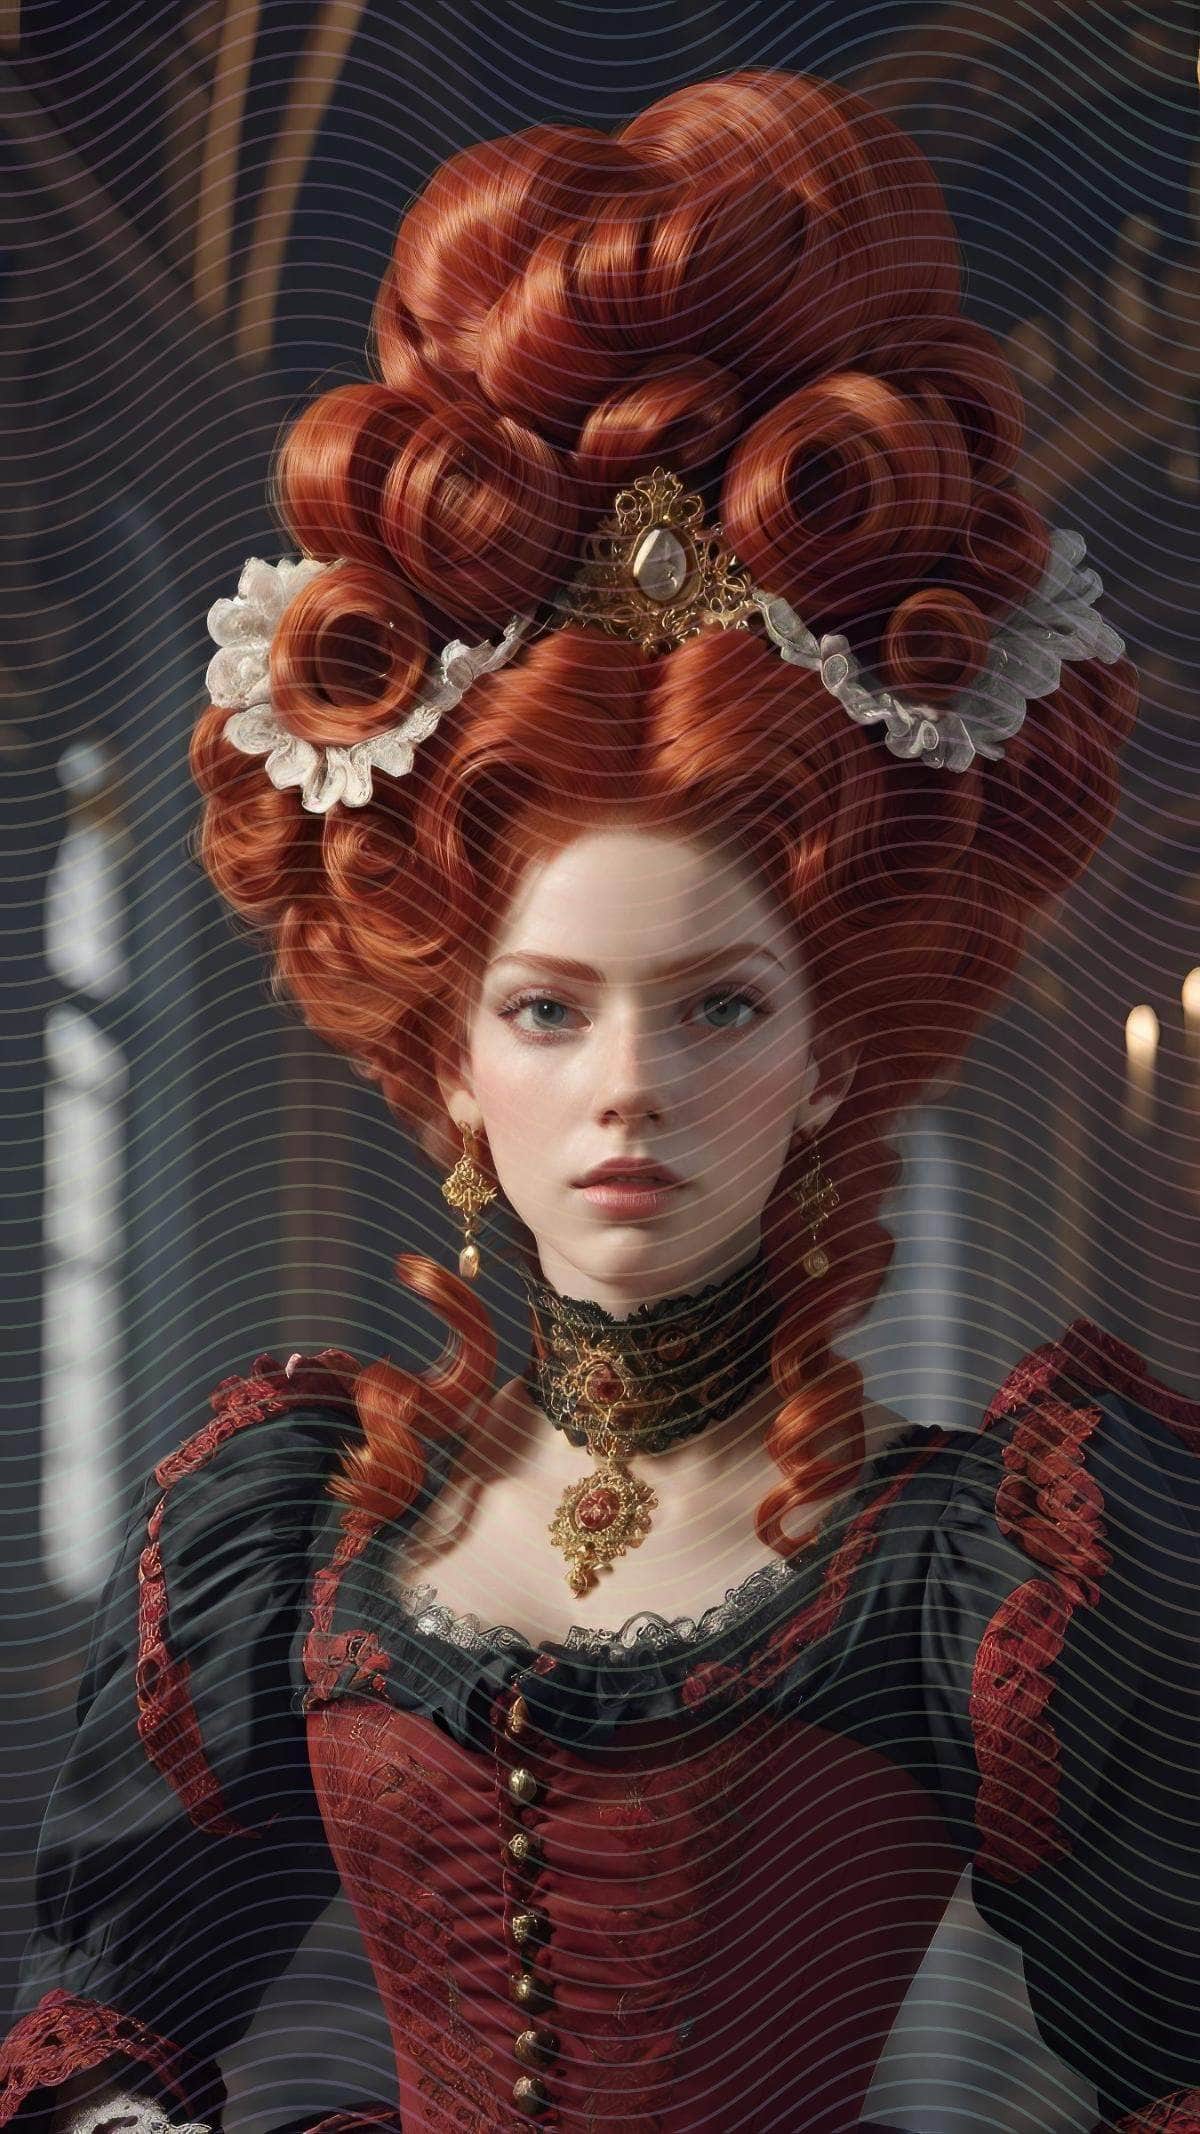 A Close-Up Portrait of A Gothic Woman in Red Exaggerated Hair